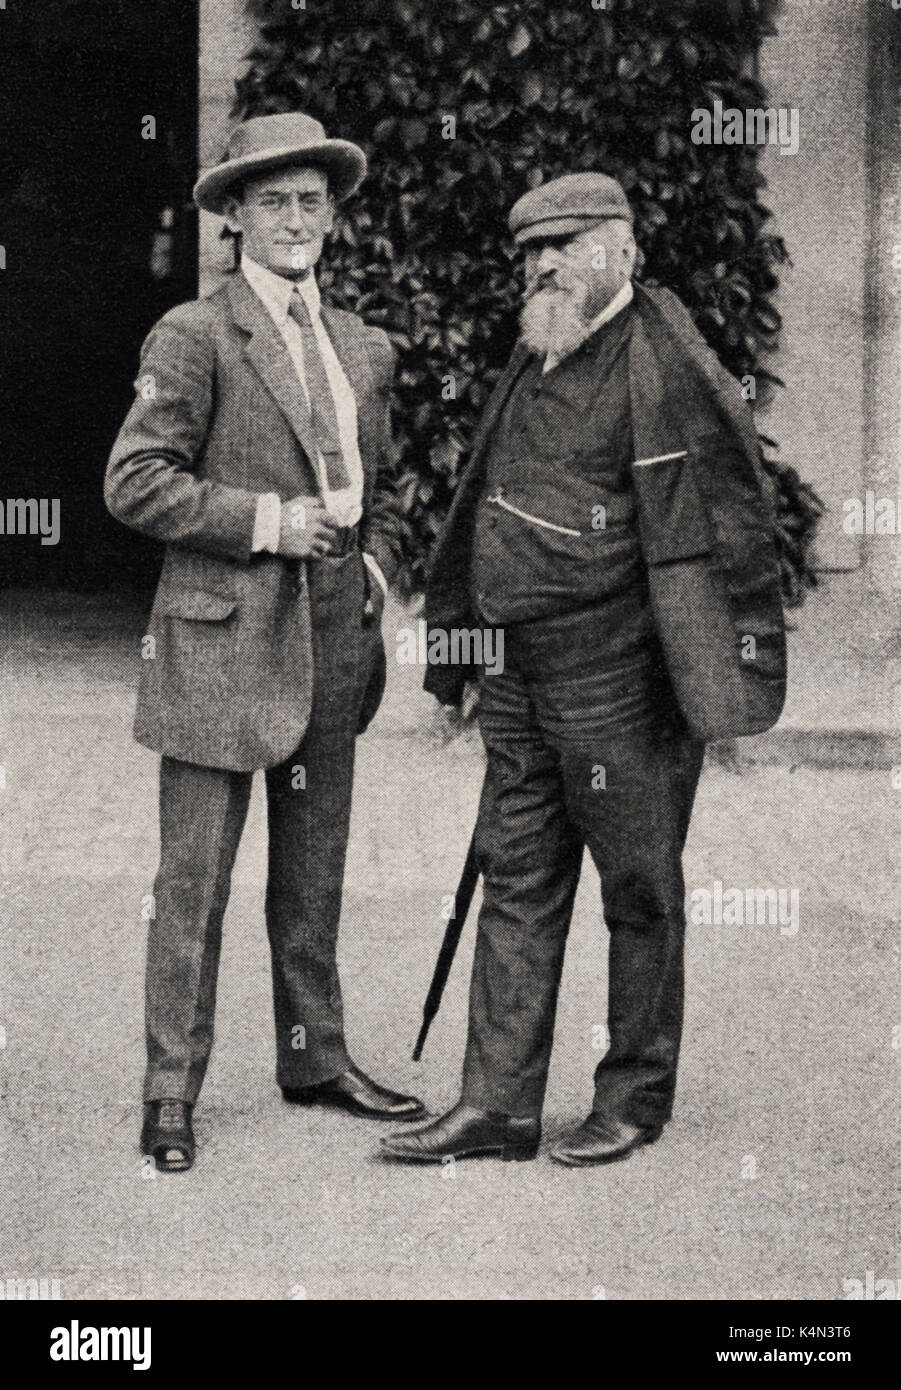 Richter, Hans with Carl Muck at Bayreuth German Conductor, 1843-1916 Stock Photo